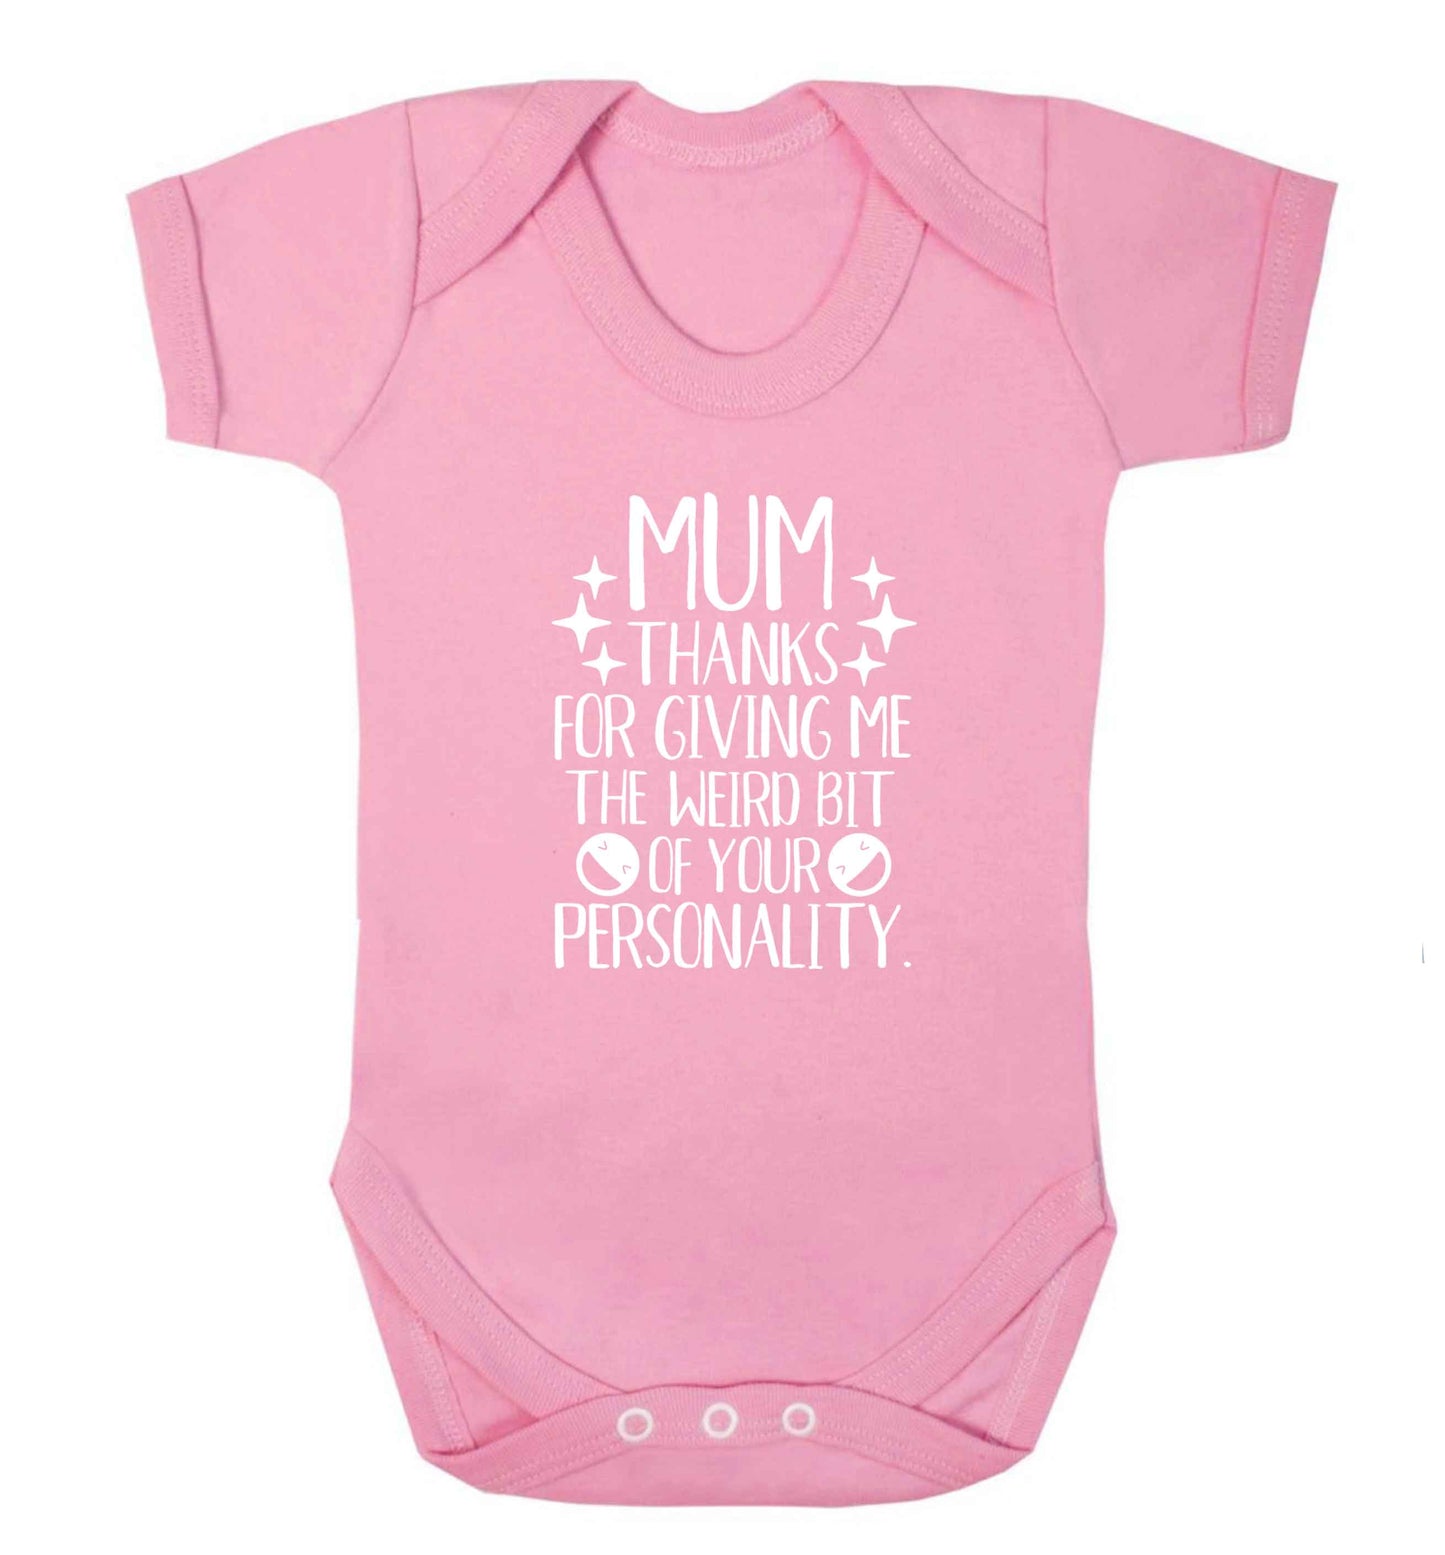 Mum thanks for giving me the weird bit of your personality baby vest pale pink 18-24 months